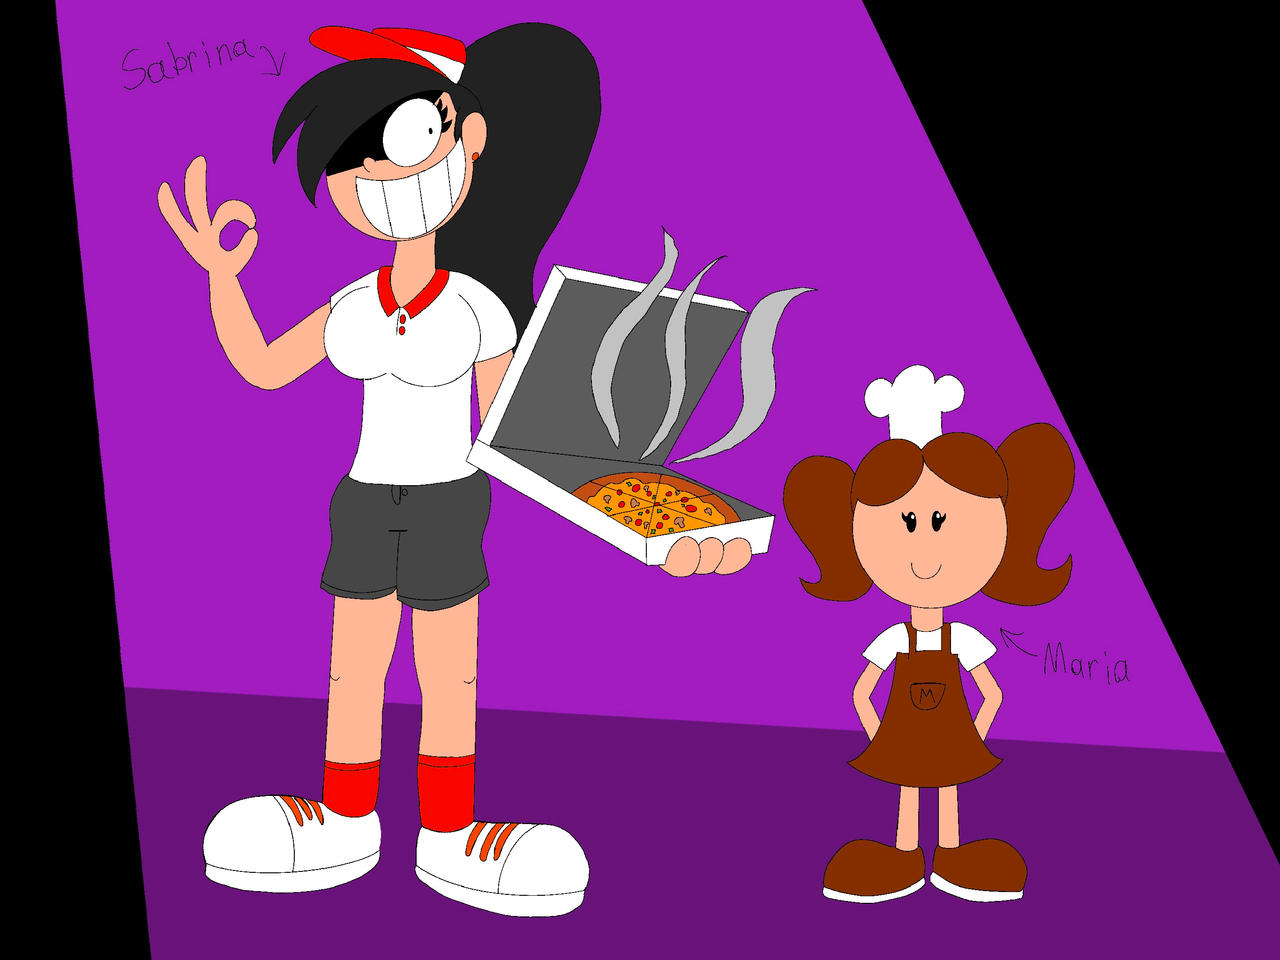 Pizza tower title but it's trio by Topdowner09 on DeviantArt